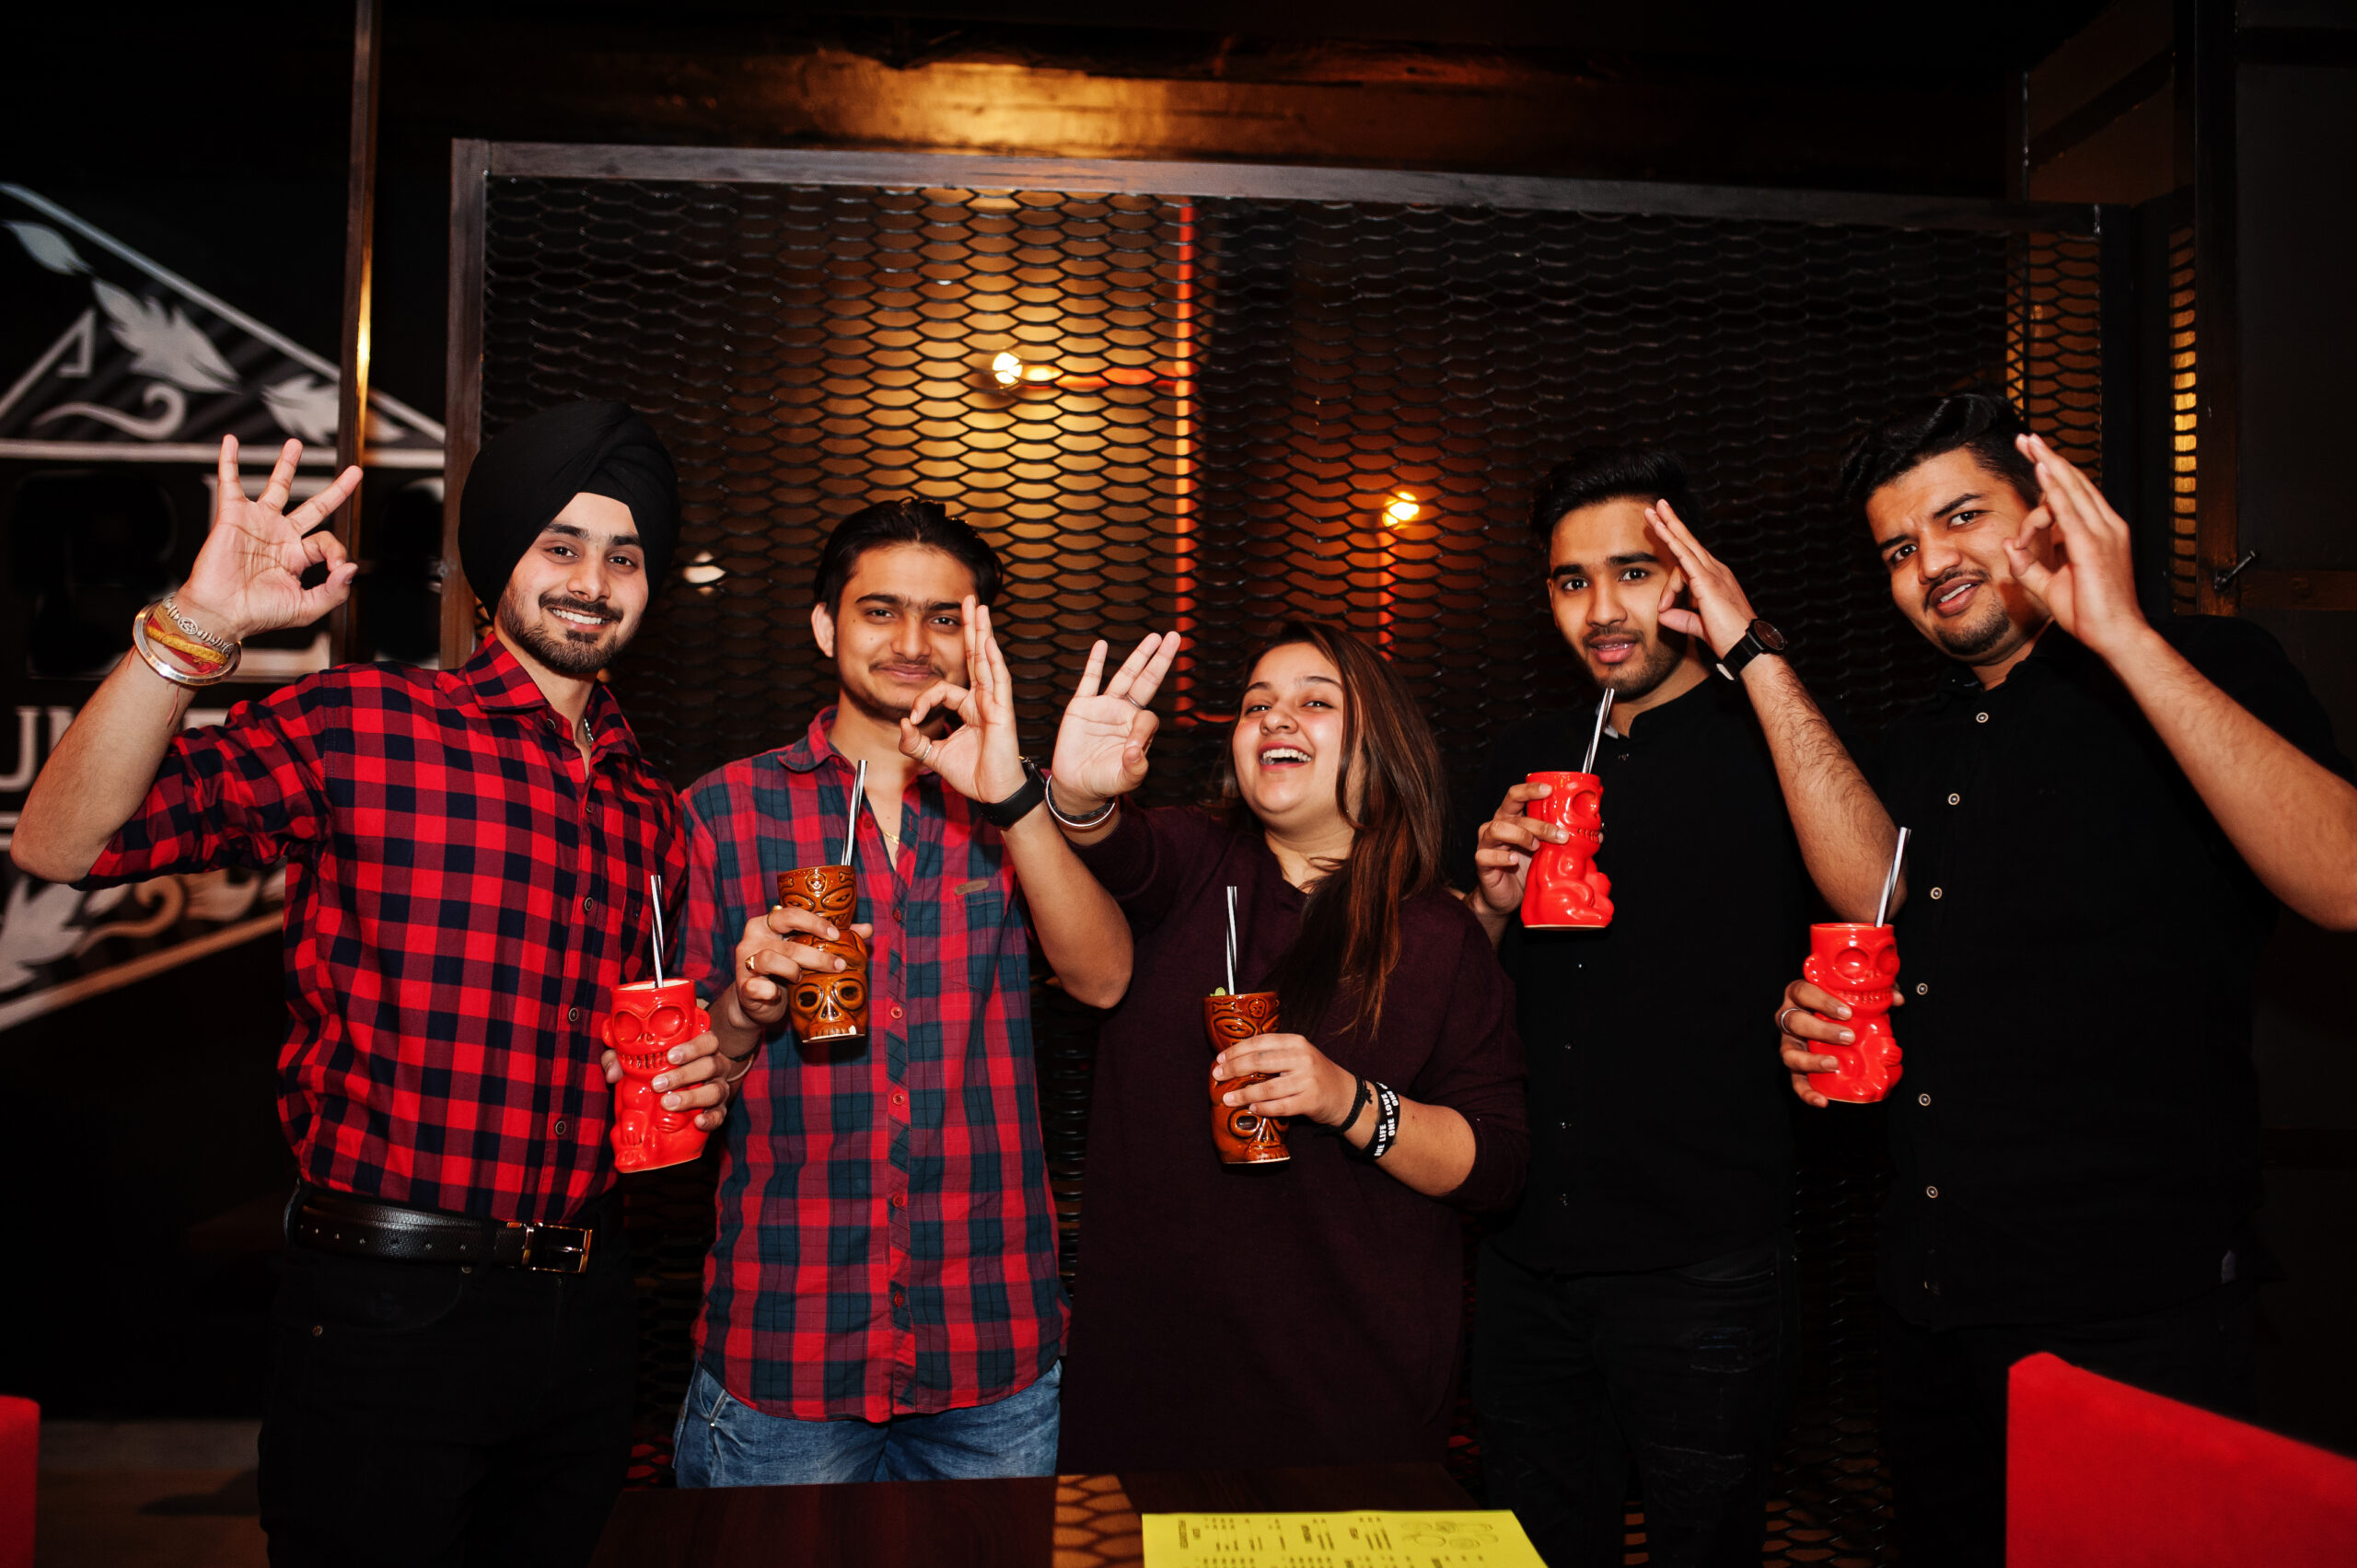 Group of indian friends having fun and rest at night club, drinking cocktails and show ok fingers together.